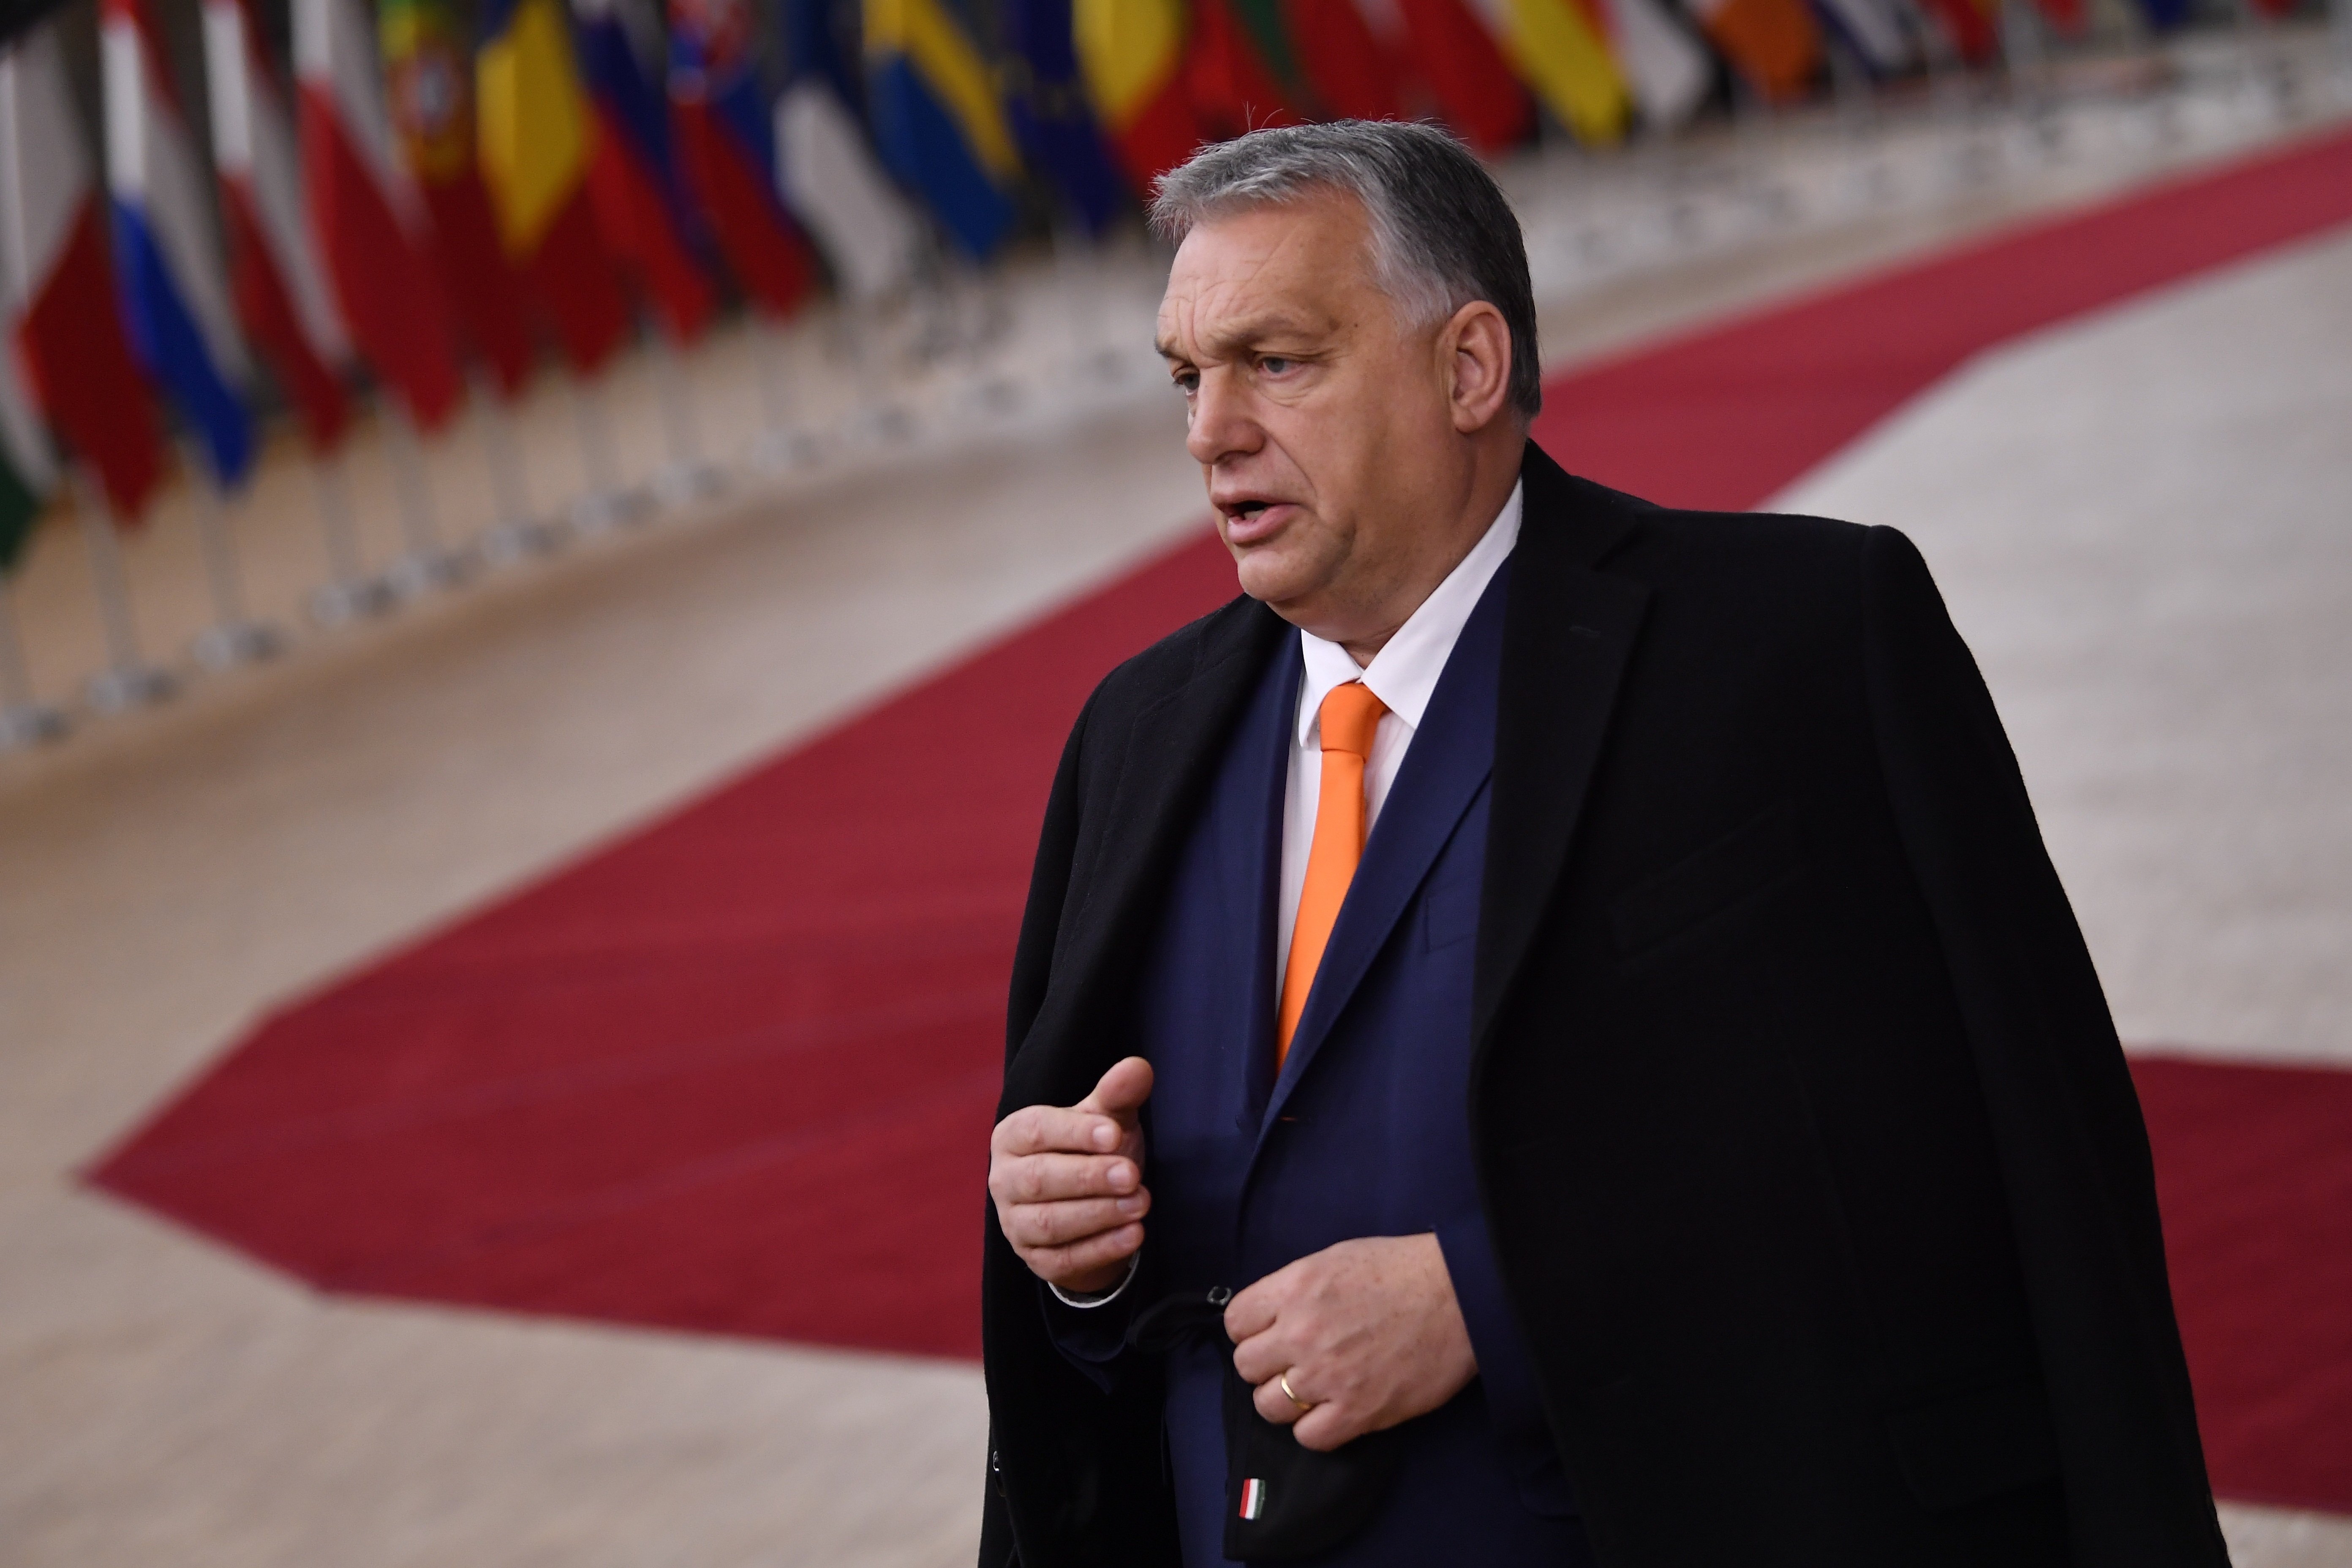 European Parliament decides that Hungary can no longer be considered a full democracy